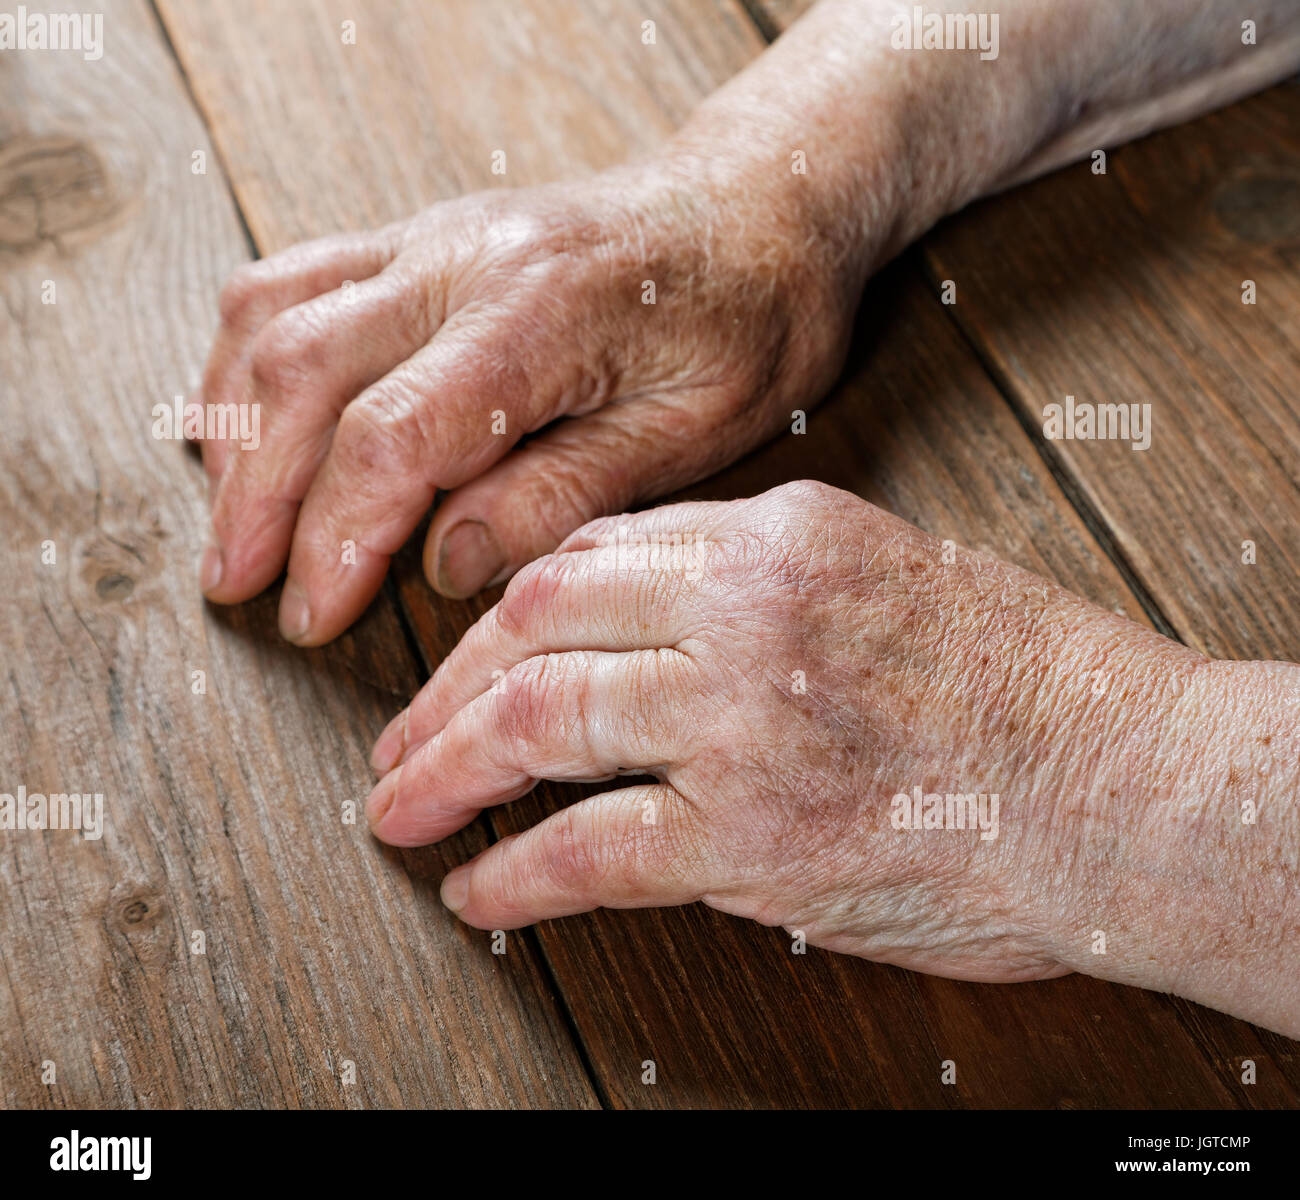 Hands of an old woman close-up on a table Stock Photo